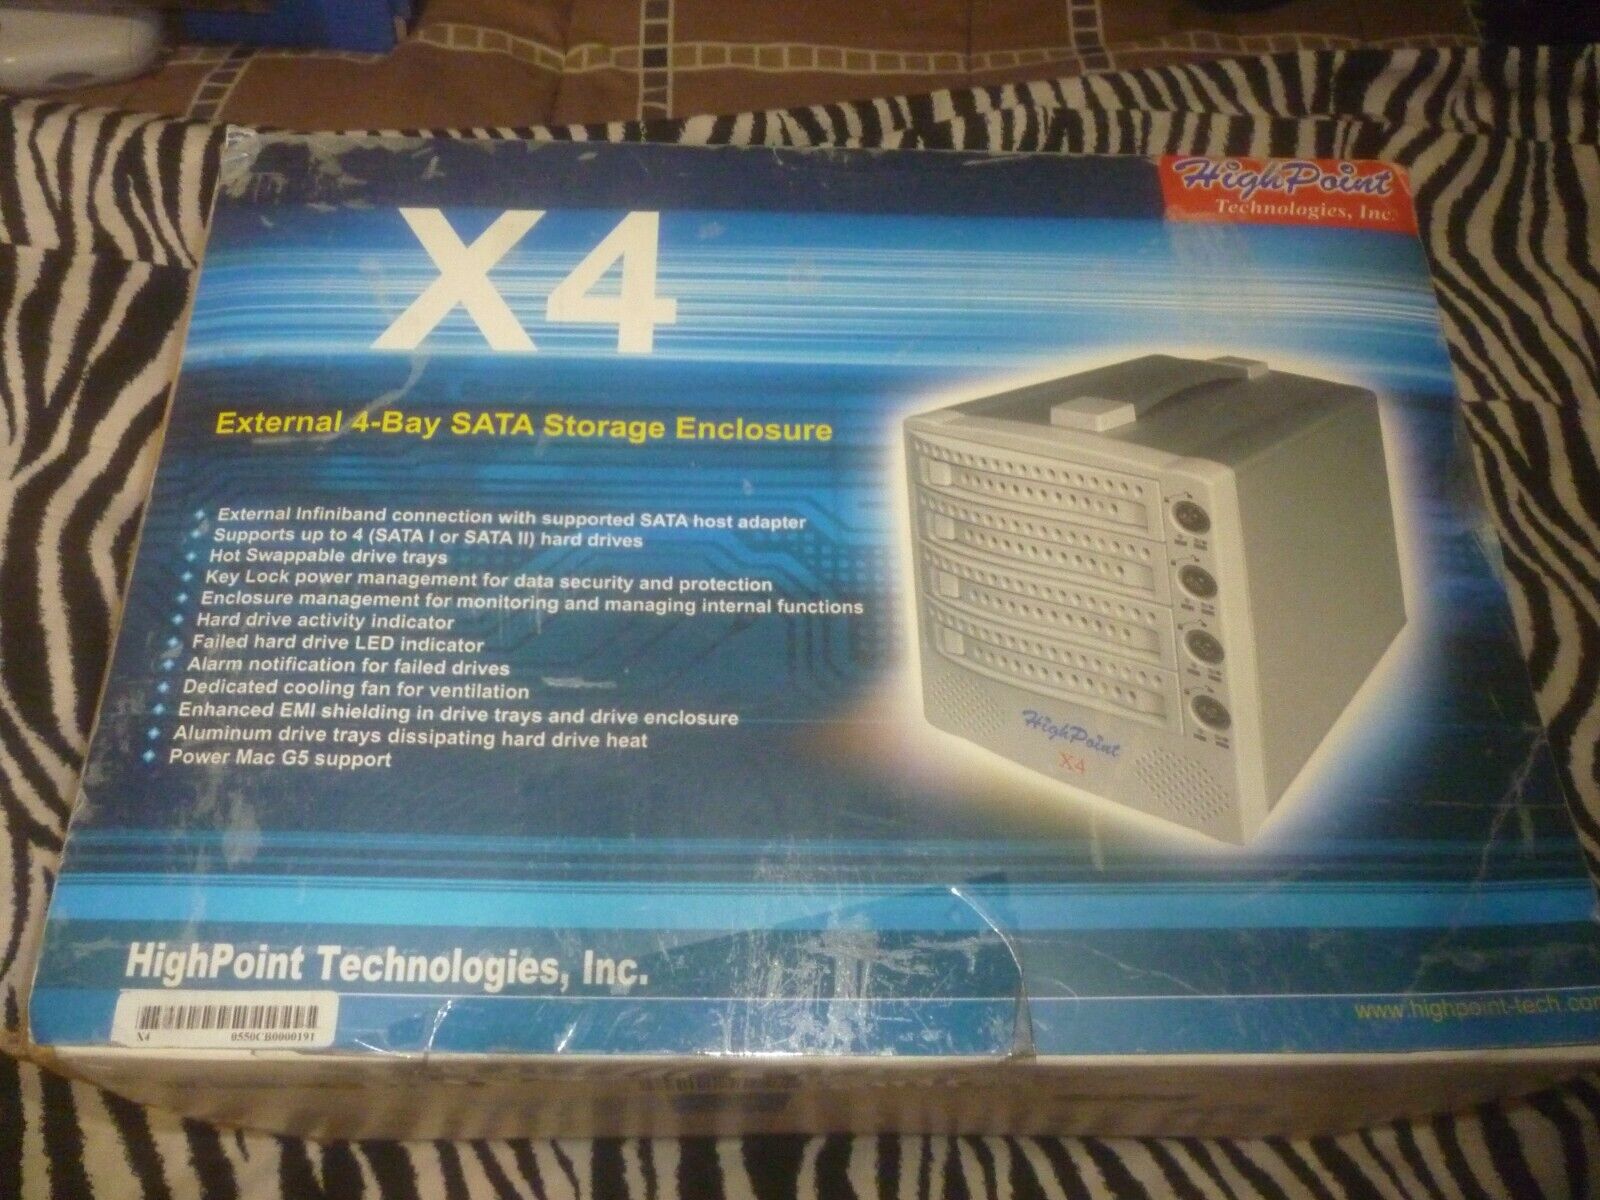 High Point technologies X4 External 4-Bay SATA Storage Enclosure - Used Untested